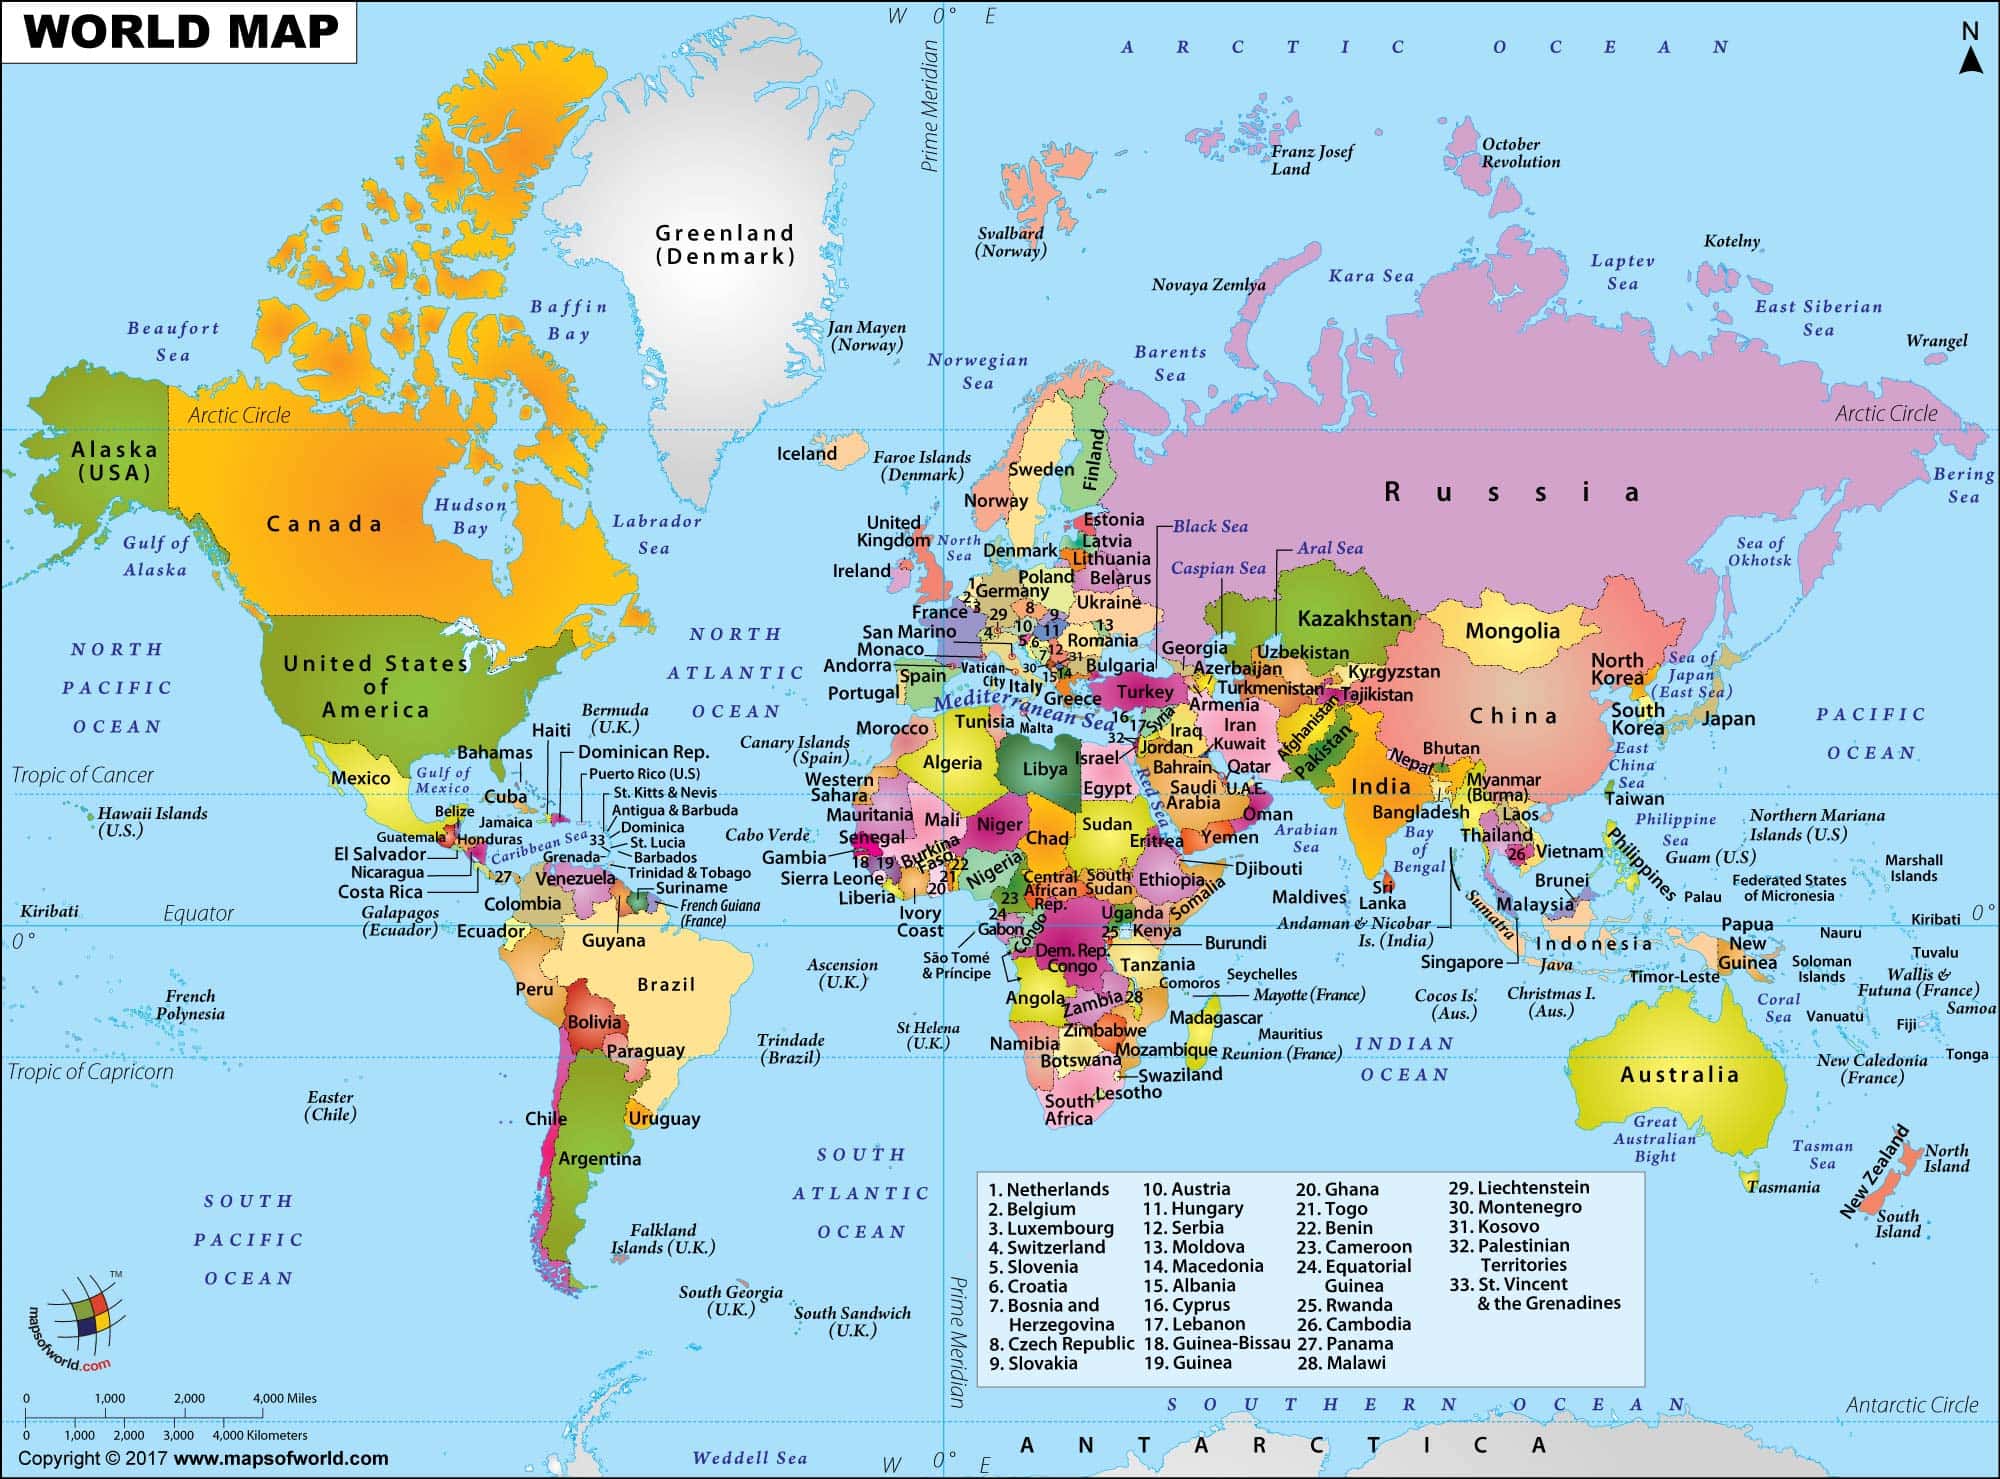 image of a world map World Map Hd Picture World Map Hd Image image of a world map